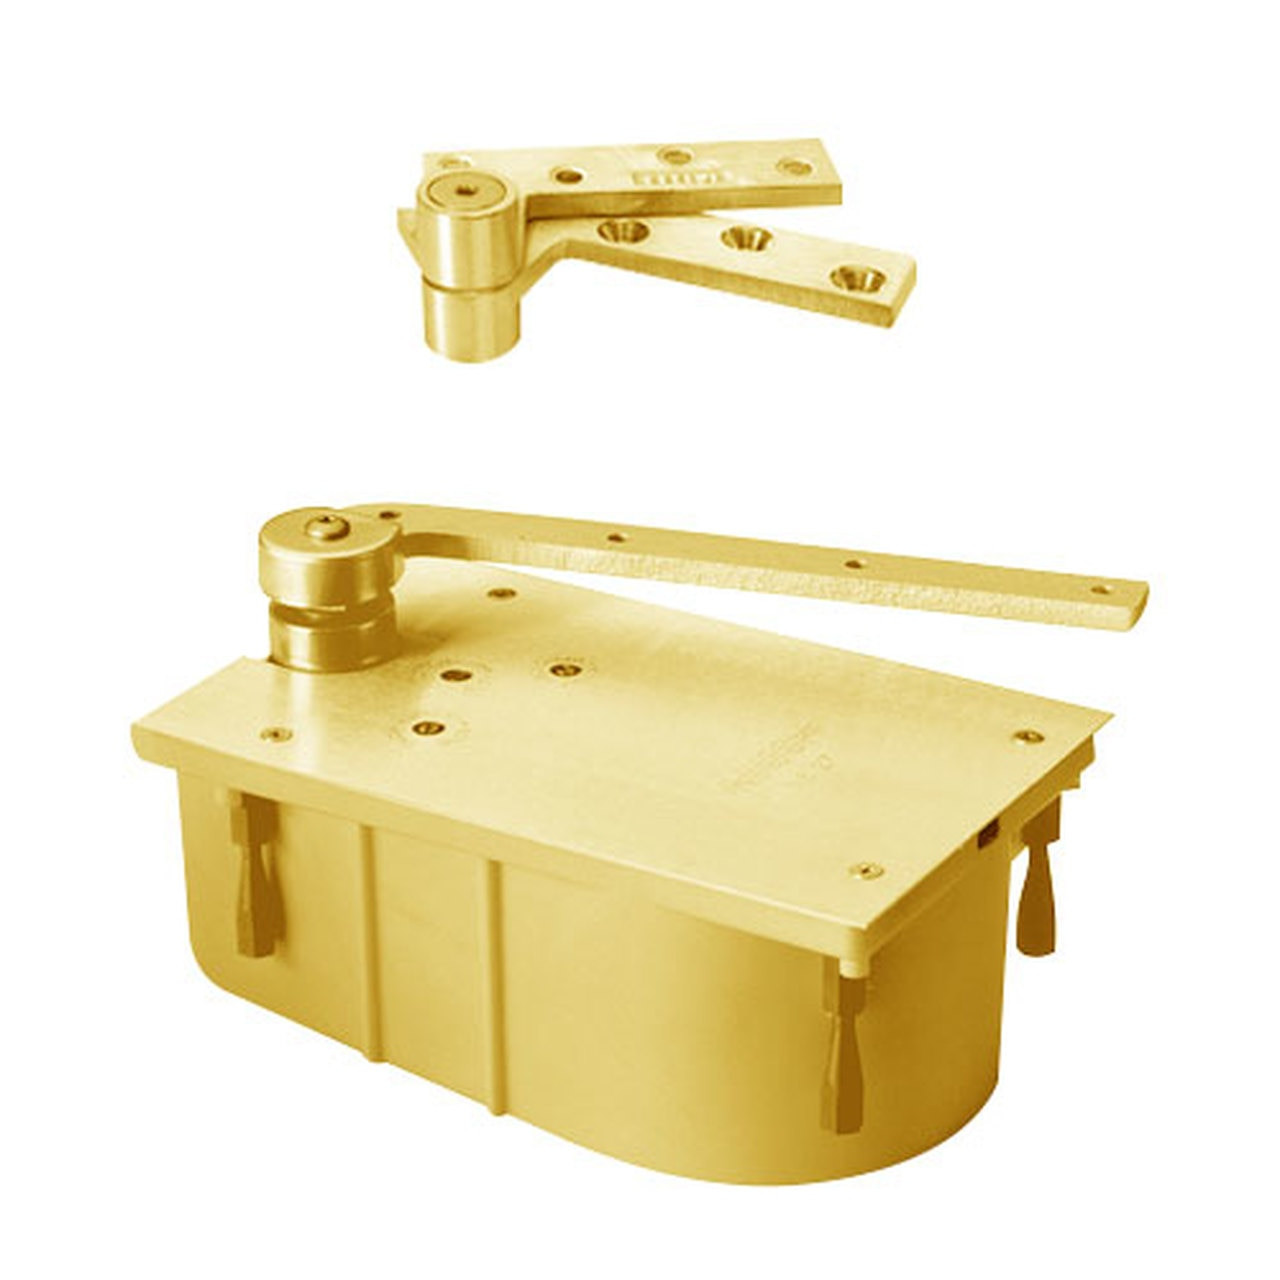 F127-90N-LFP-LCC-LH-605 Rixson 27 Series Fire Rated Heavy Duty 3/4" Offset Hung Floor Closer in Bright Brass Finish